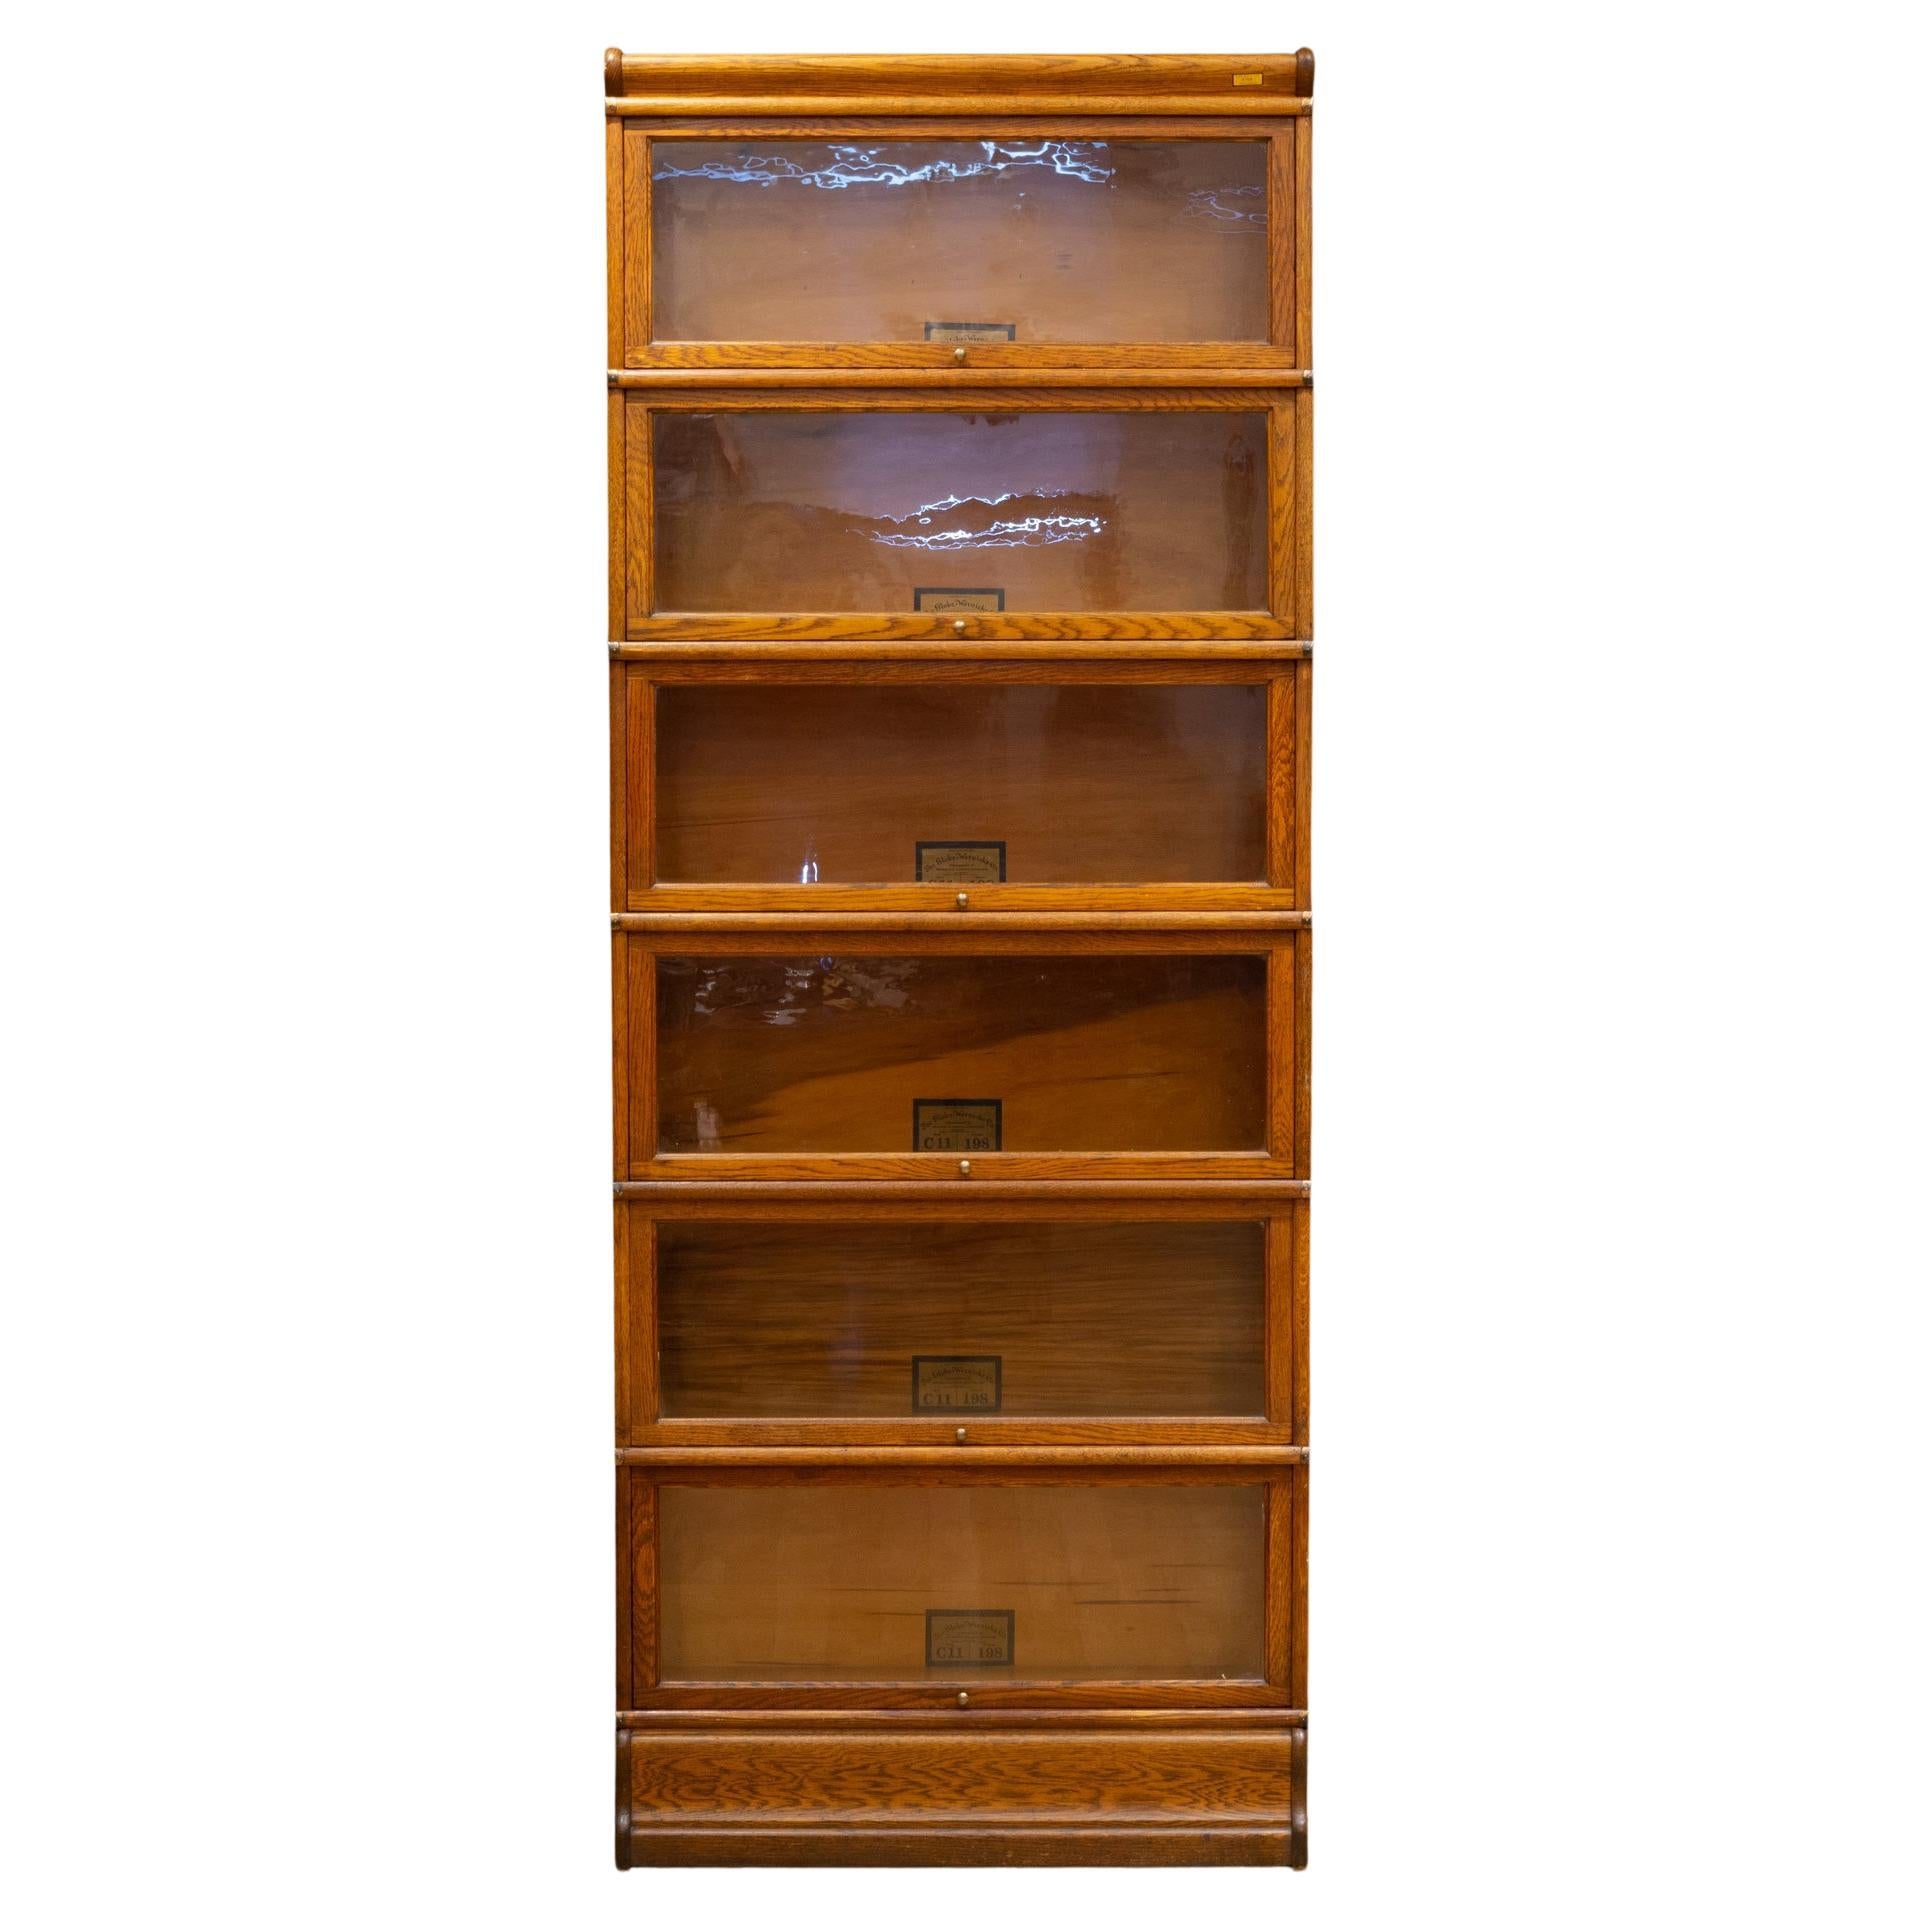 Early 20th C. Globe-Wernicke Quarter Sawn 6 Stack Lawyer's Bookcase, C.1910